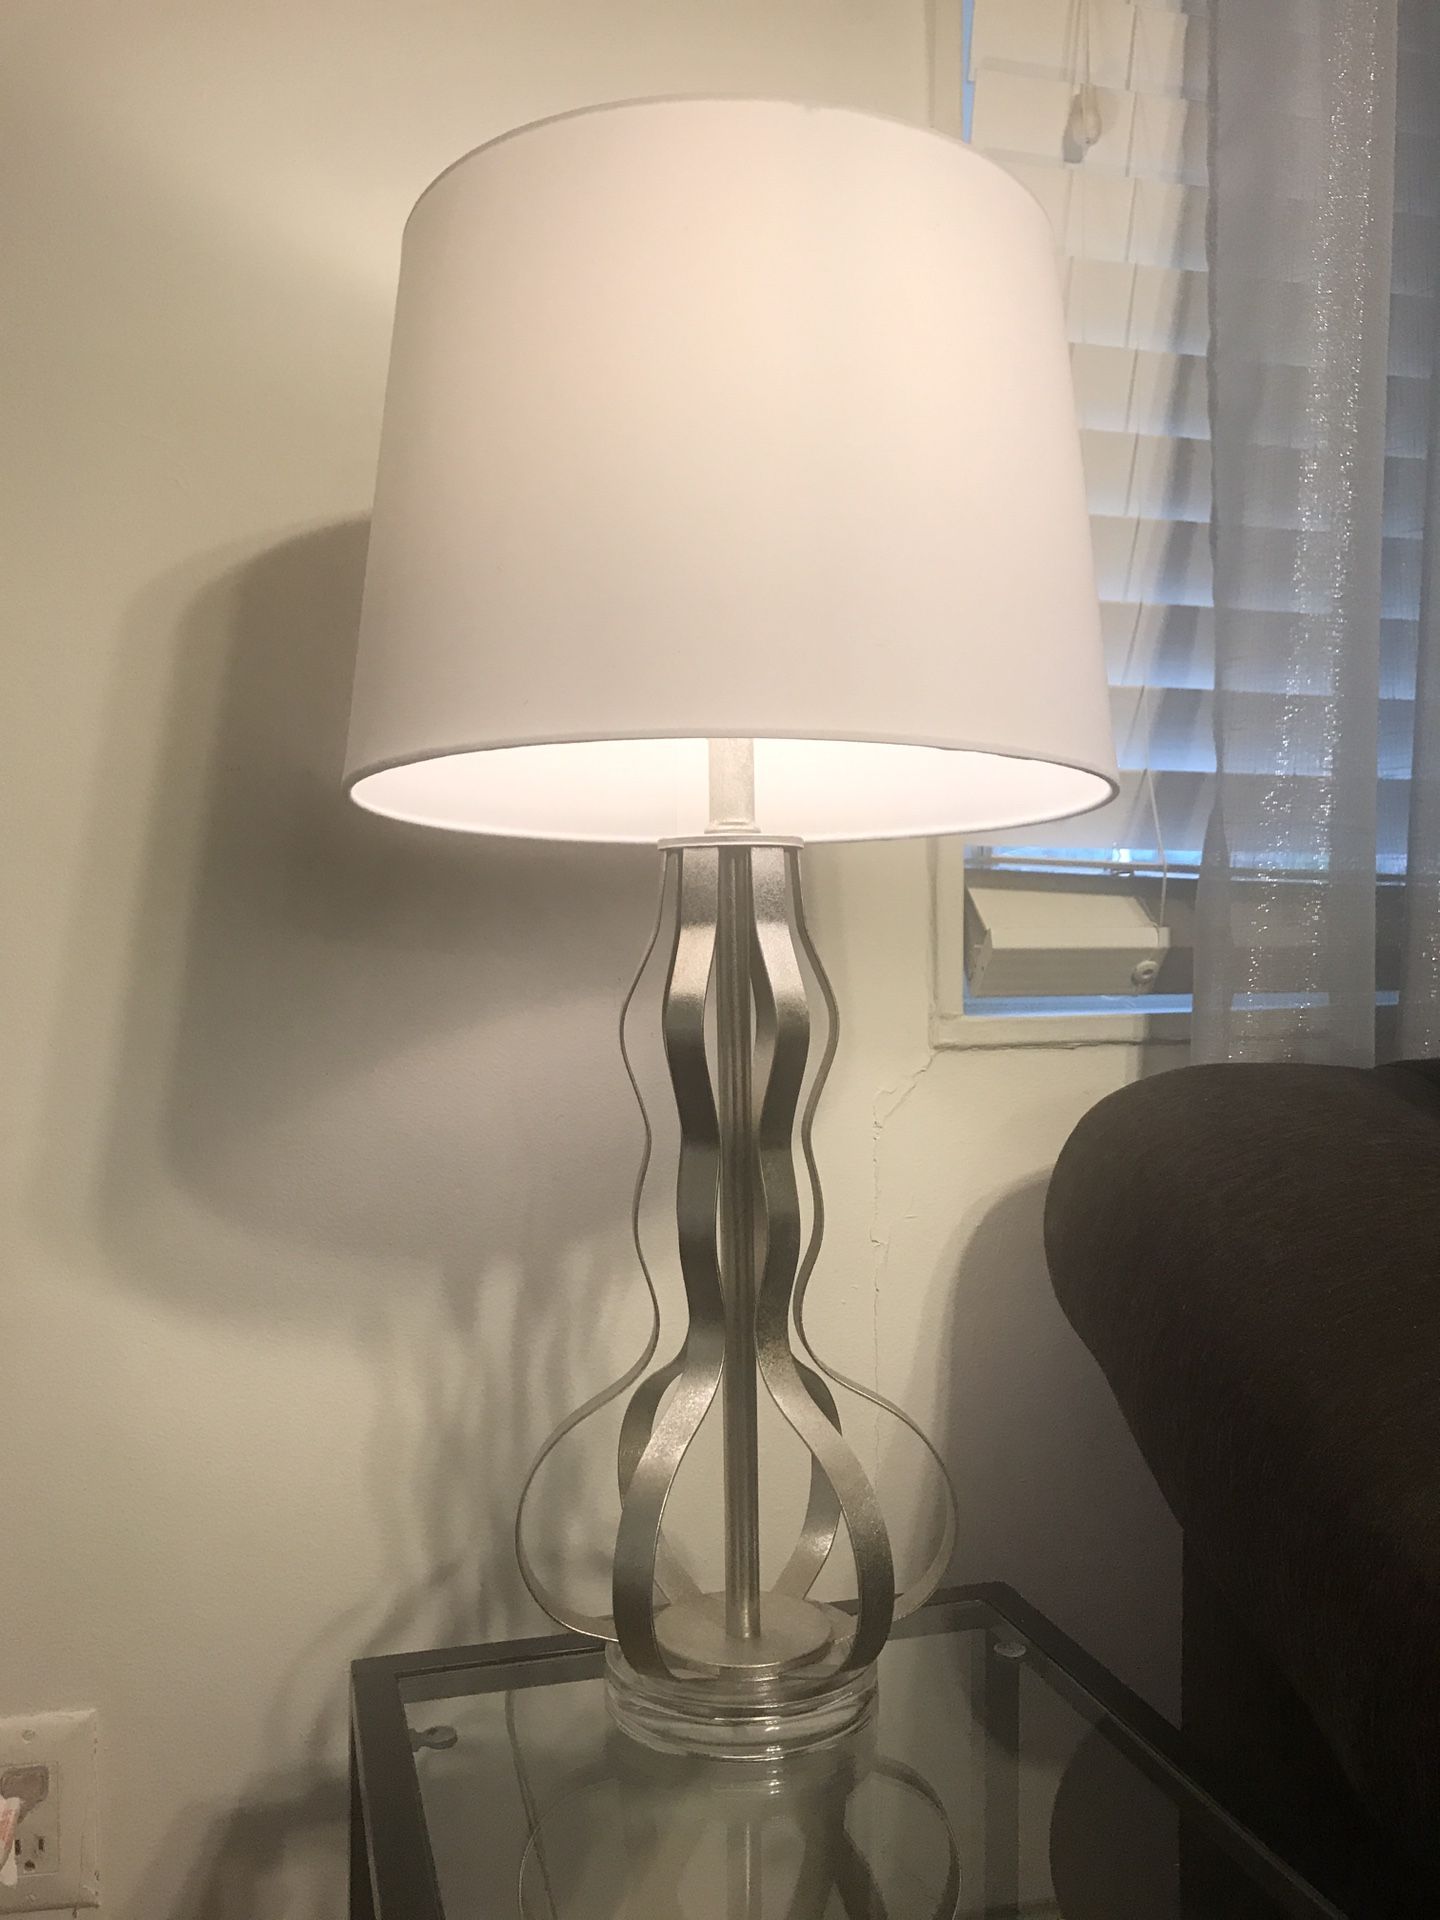 Modern table lamps 2 for $50/ white/silver/ shabby chic